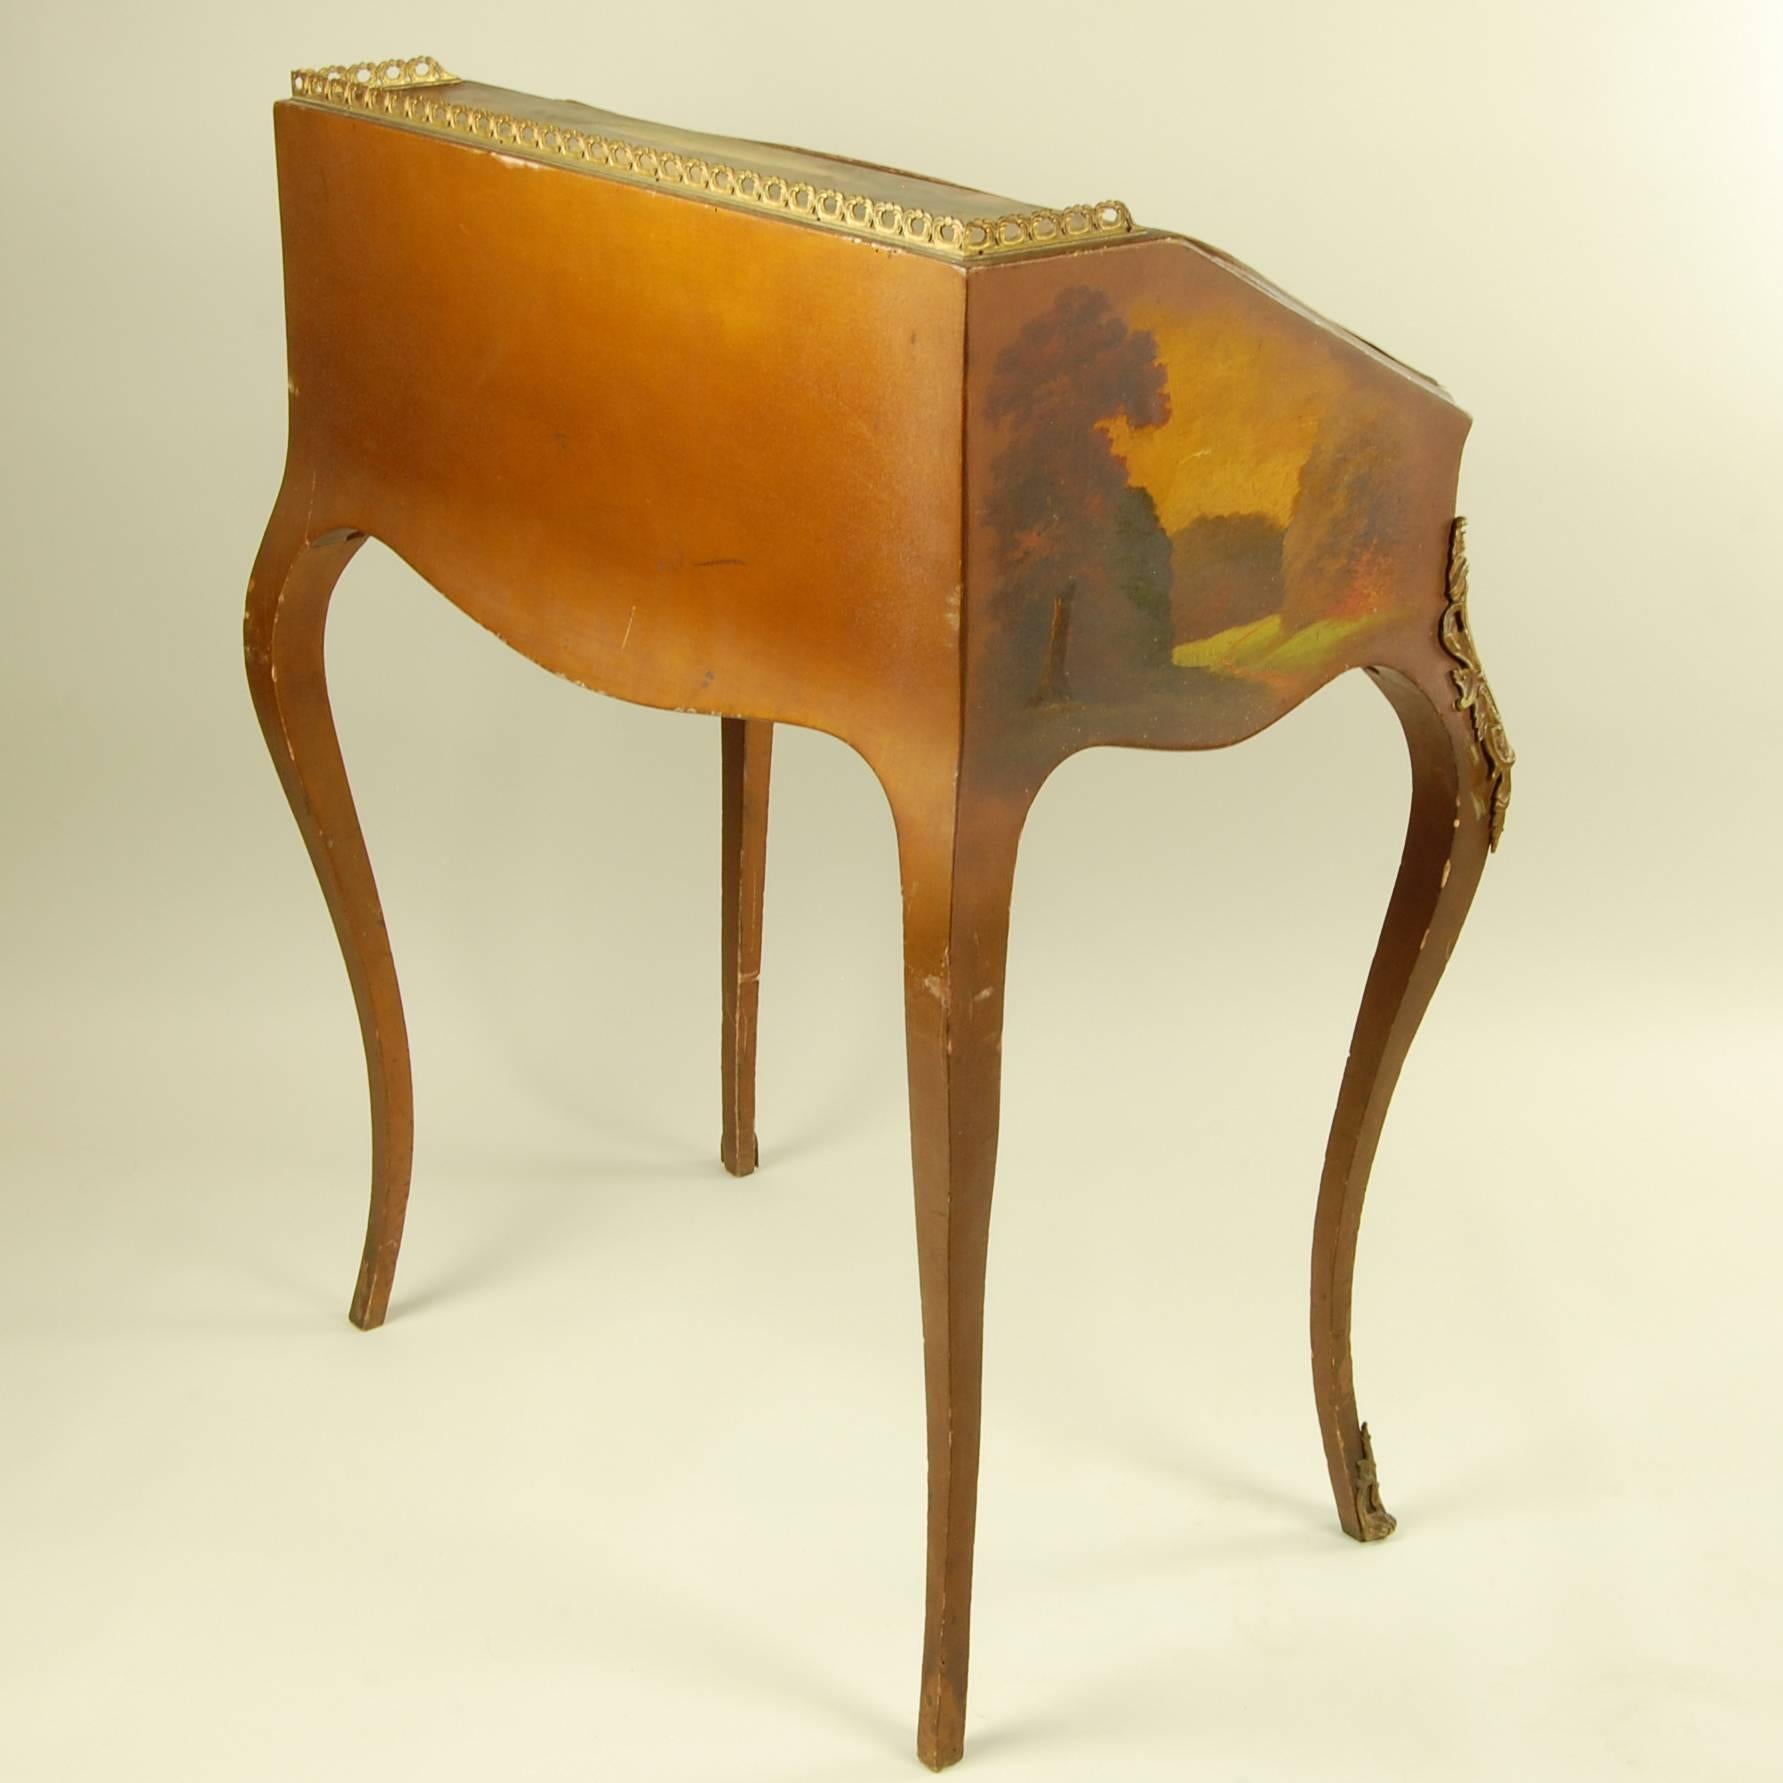 Country charm abounds in this sprightly writing desk dating from about 1880. Lavishly hand-painted, it displays several pastoral landscapes surrounding a pair of lovers in the woods. Graceful curved legs with gilded bronze knees support the desktop,